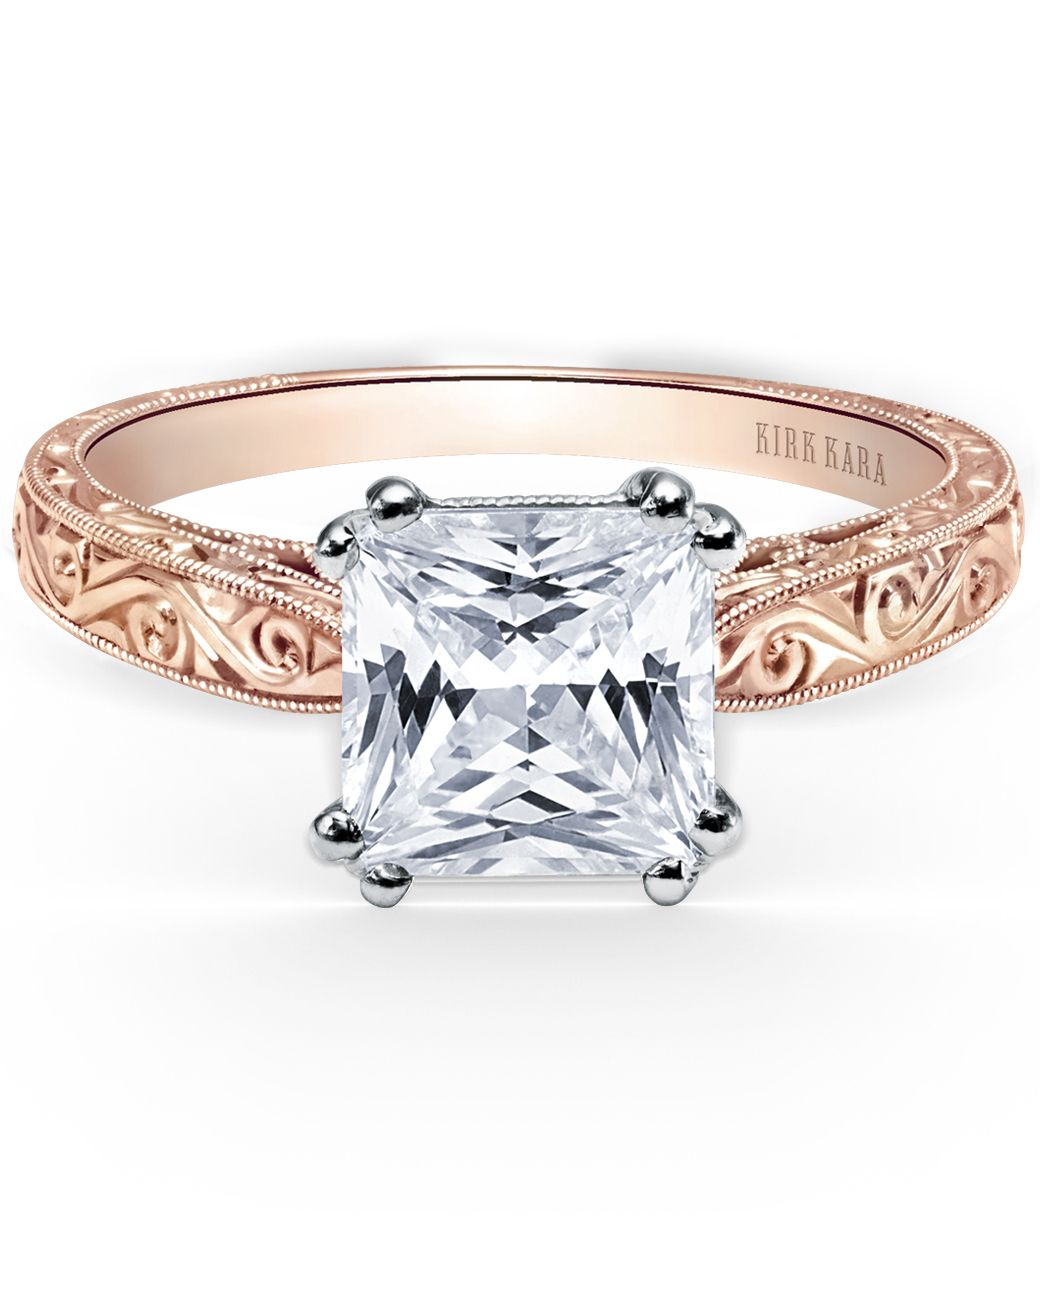 26 Rose Gold Engagement Rings We Love | Martha Stewart Weddings Pertaining To Most Current Princess Cut Single Diamond Wedding Bands In Rose Gold (View 19 of 25)